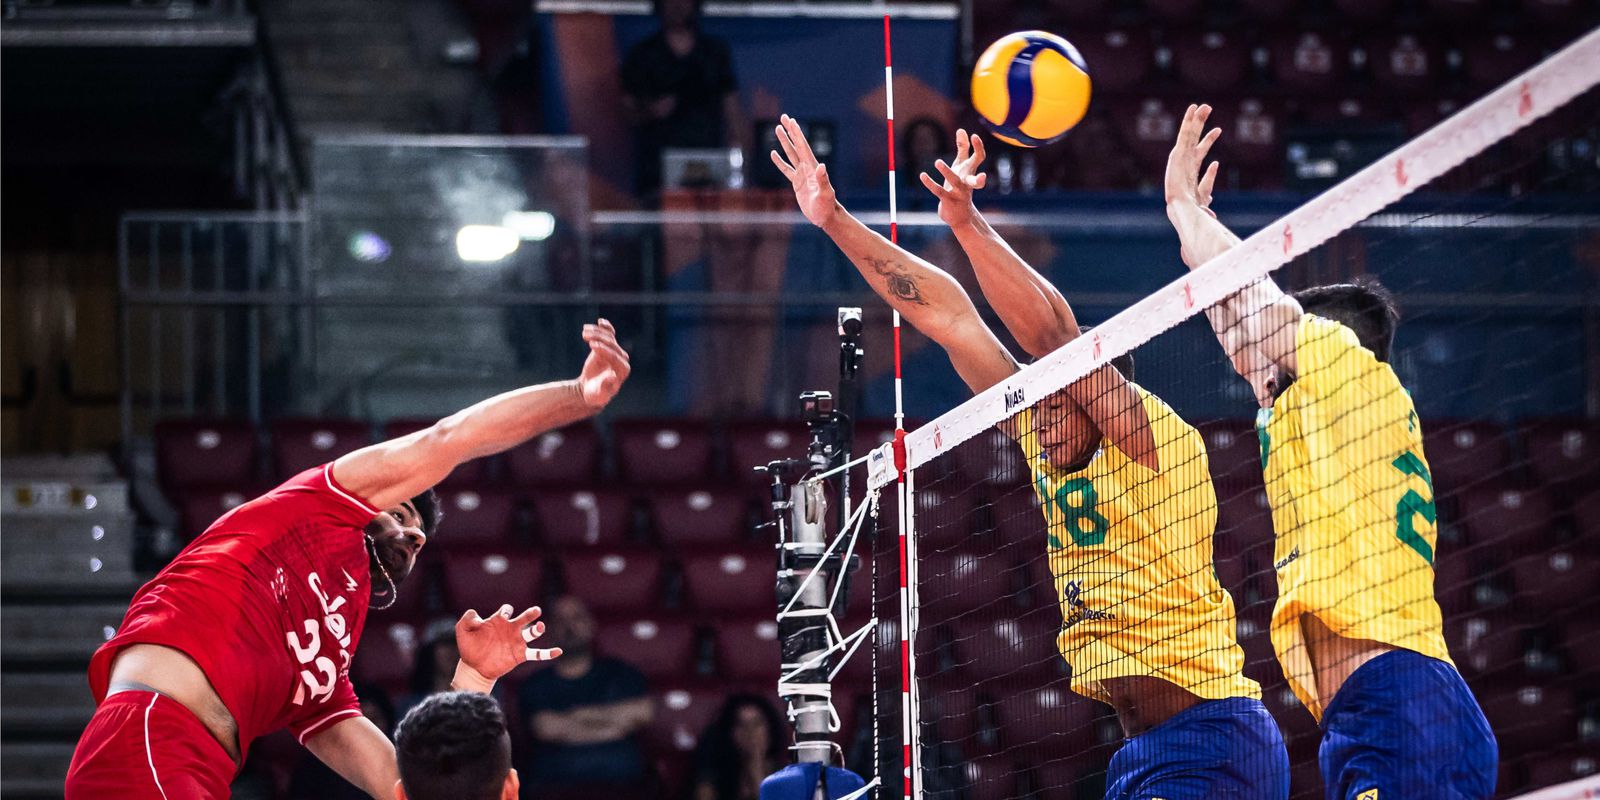 Brazil has Iran as a rival in the men's volleyball World Cup round of 16